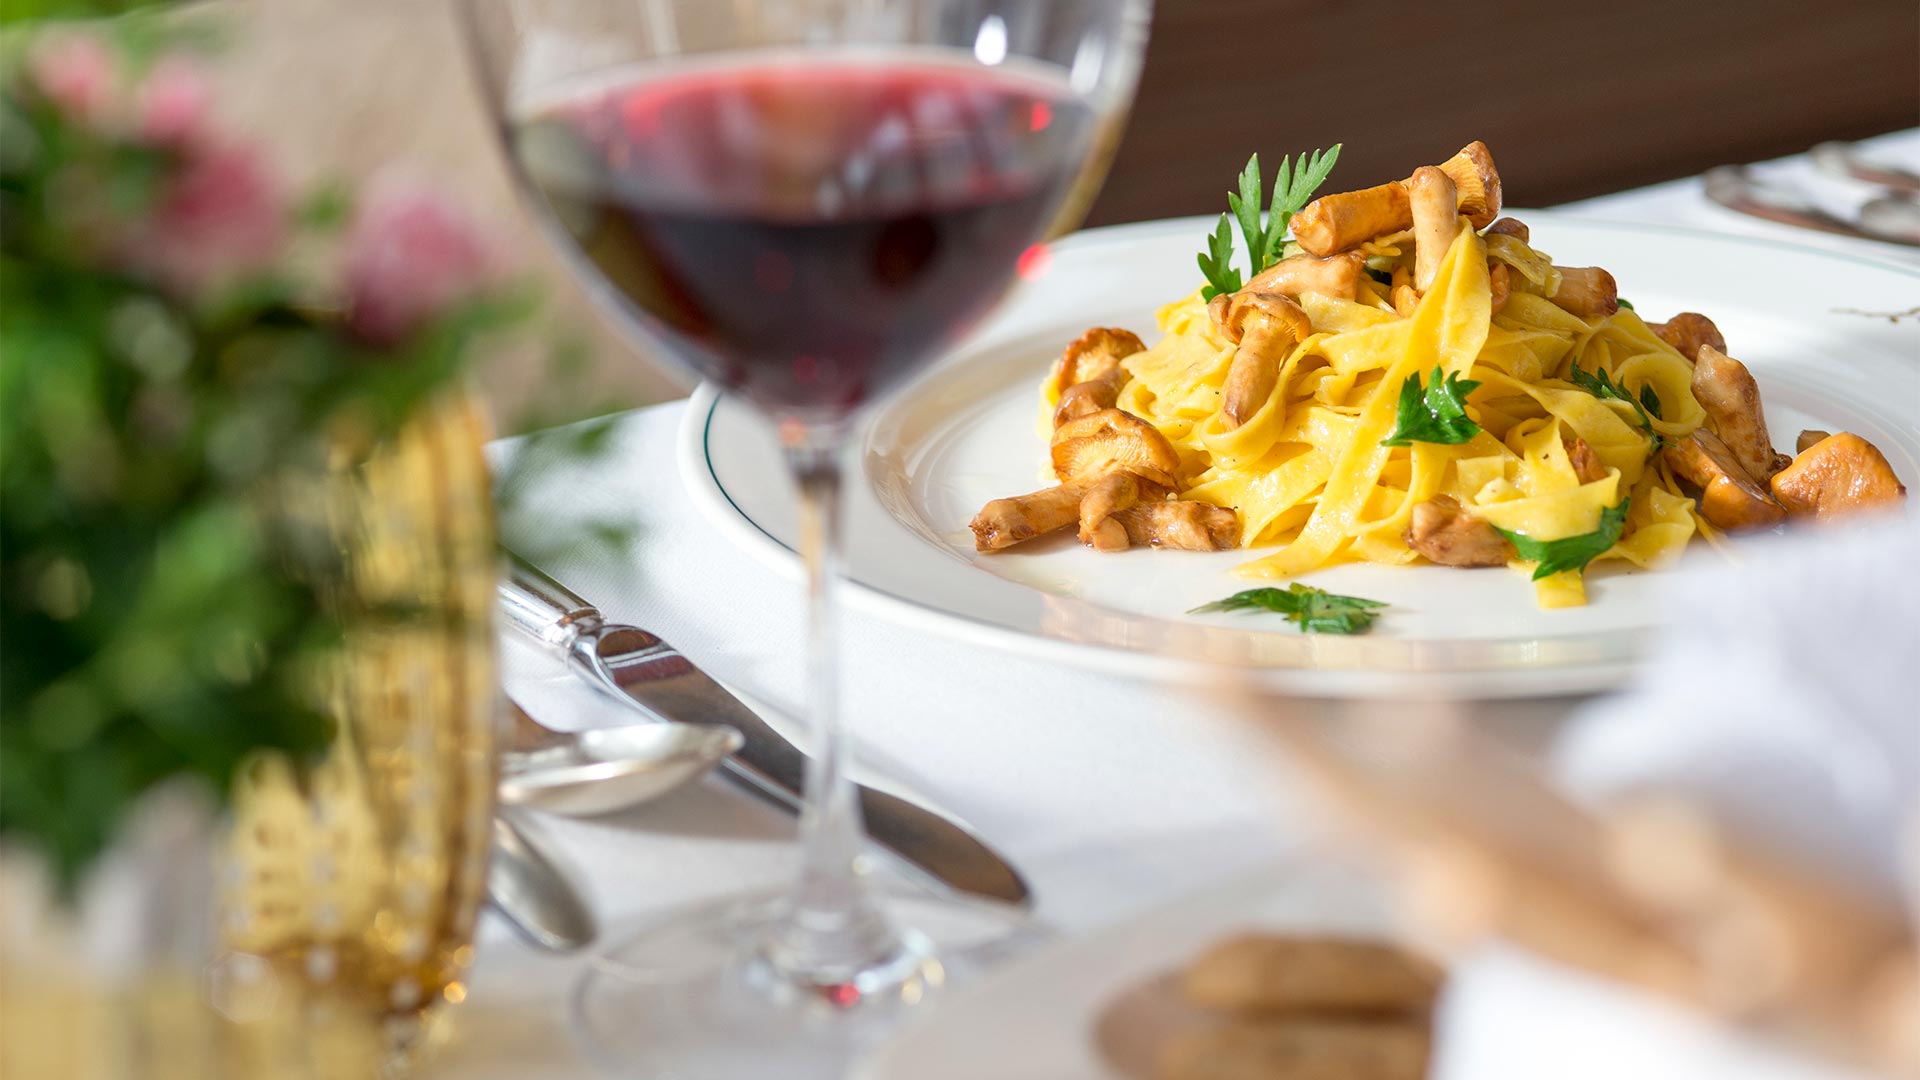 On a table in a restaurant with a white tablecloth is a plate of tagliatelle with meat sauce, served with a glass of red wine.